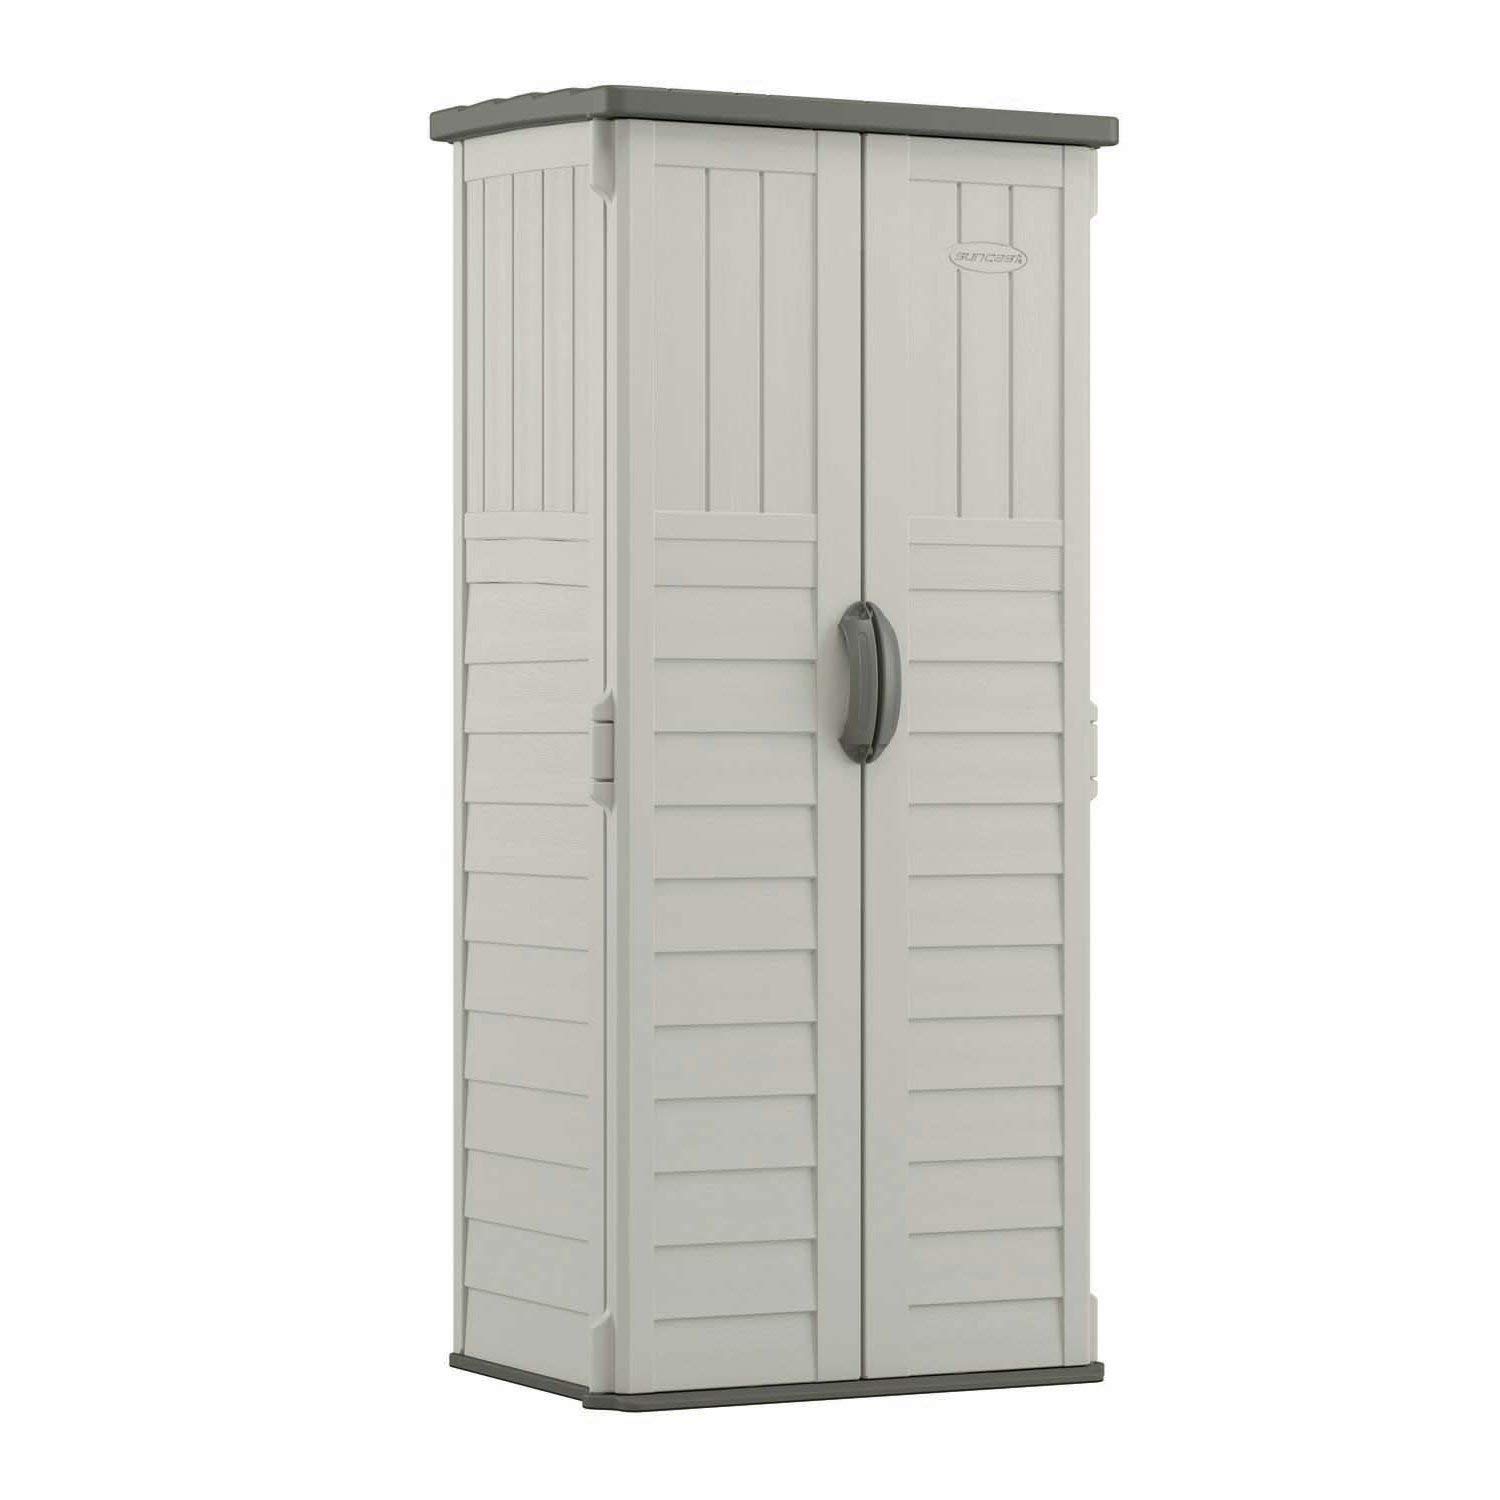 Suncast BMS1250 Resin Vertical Storage Shed, 22 Cubic feet - image 1 of 5